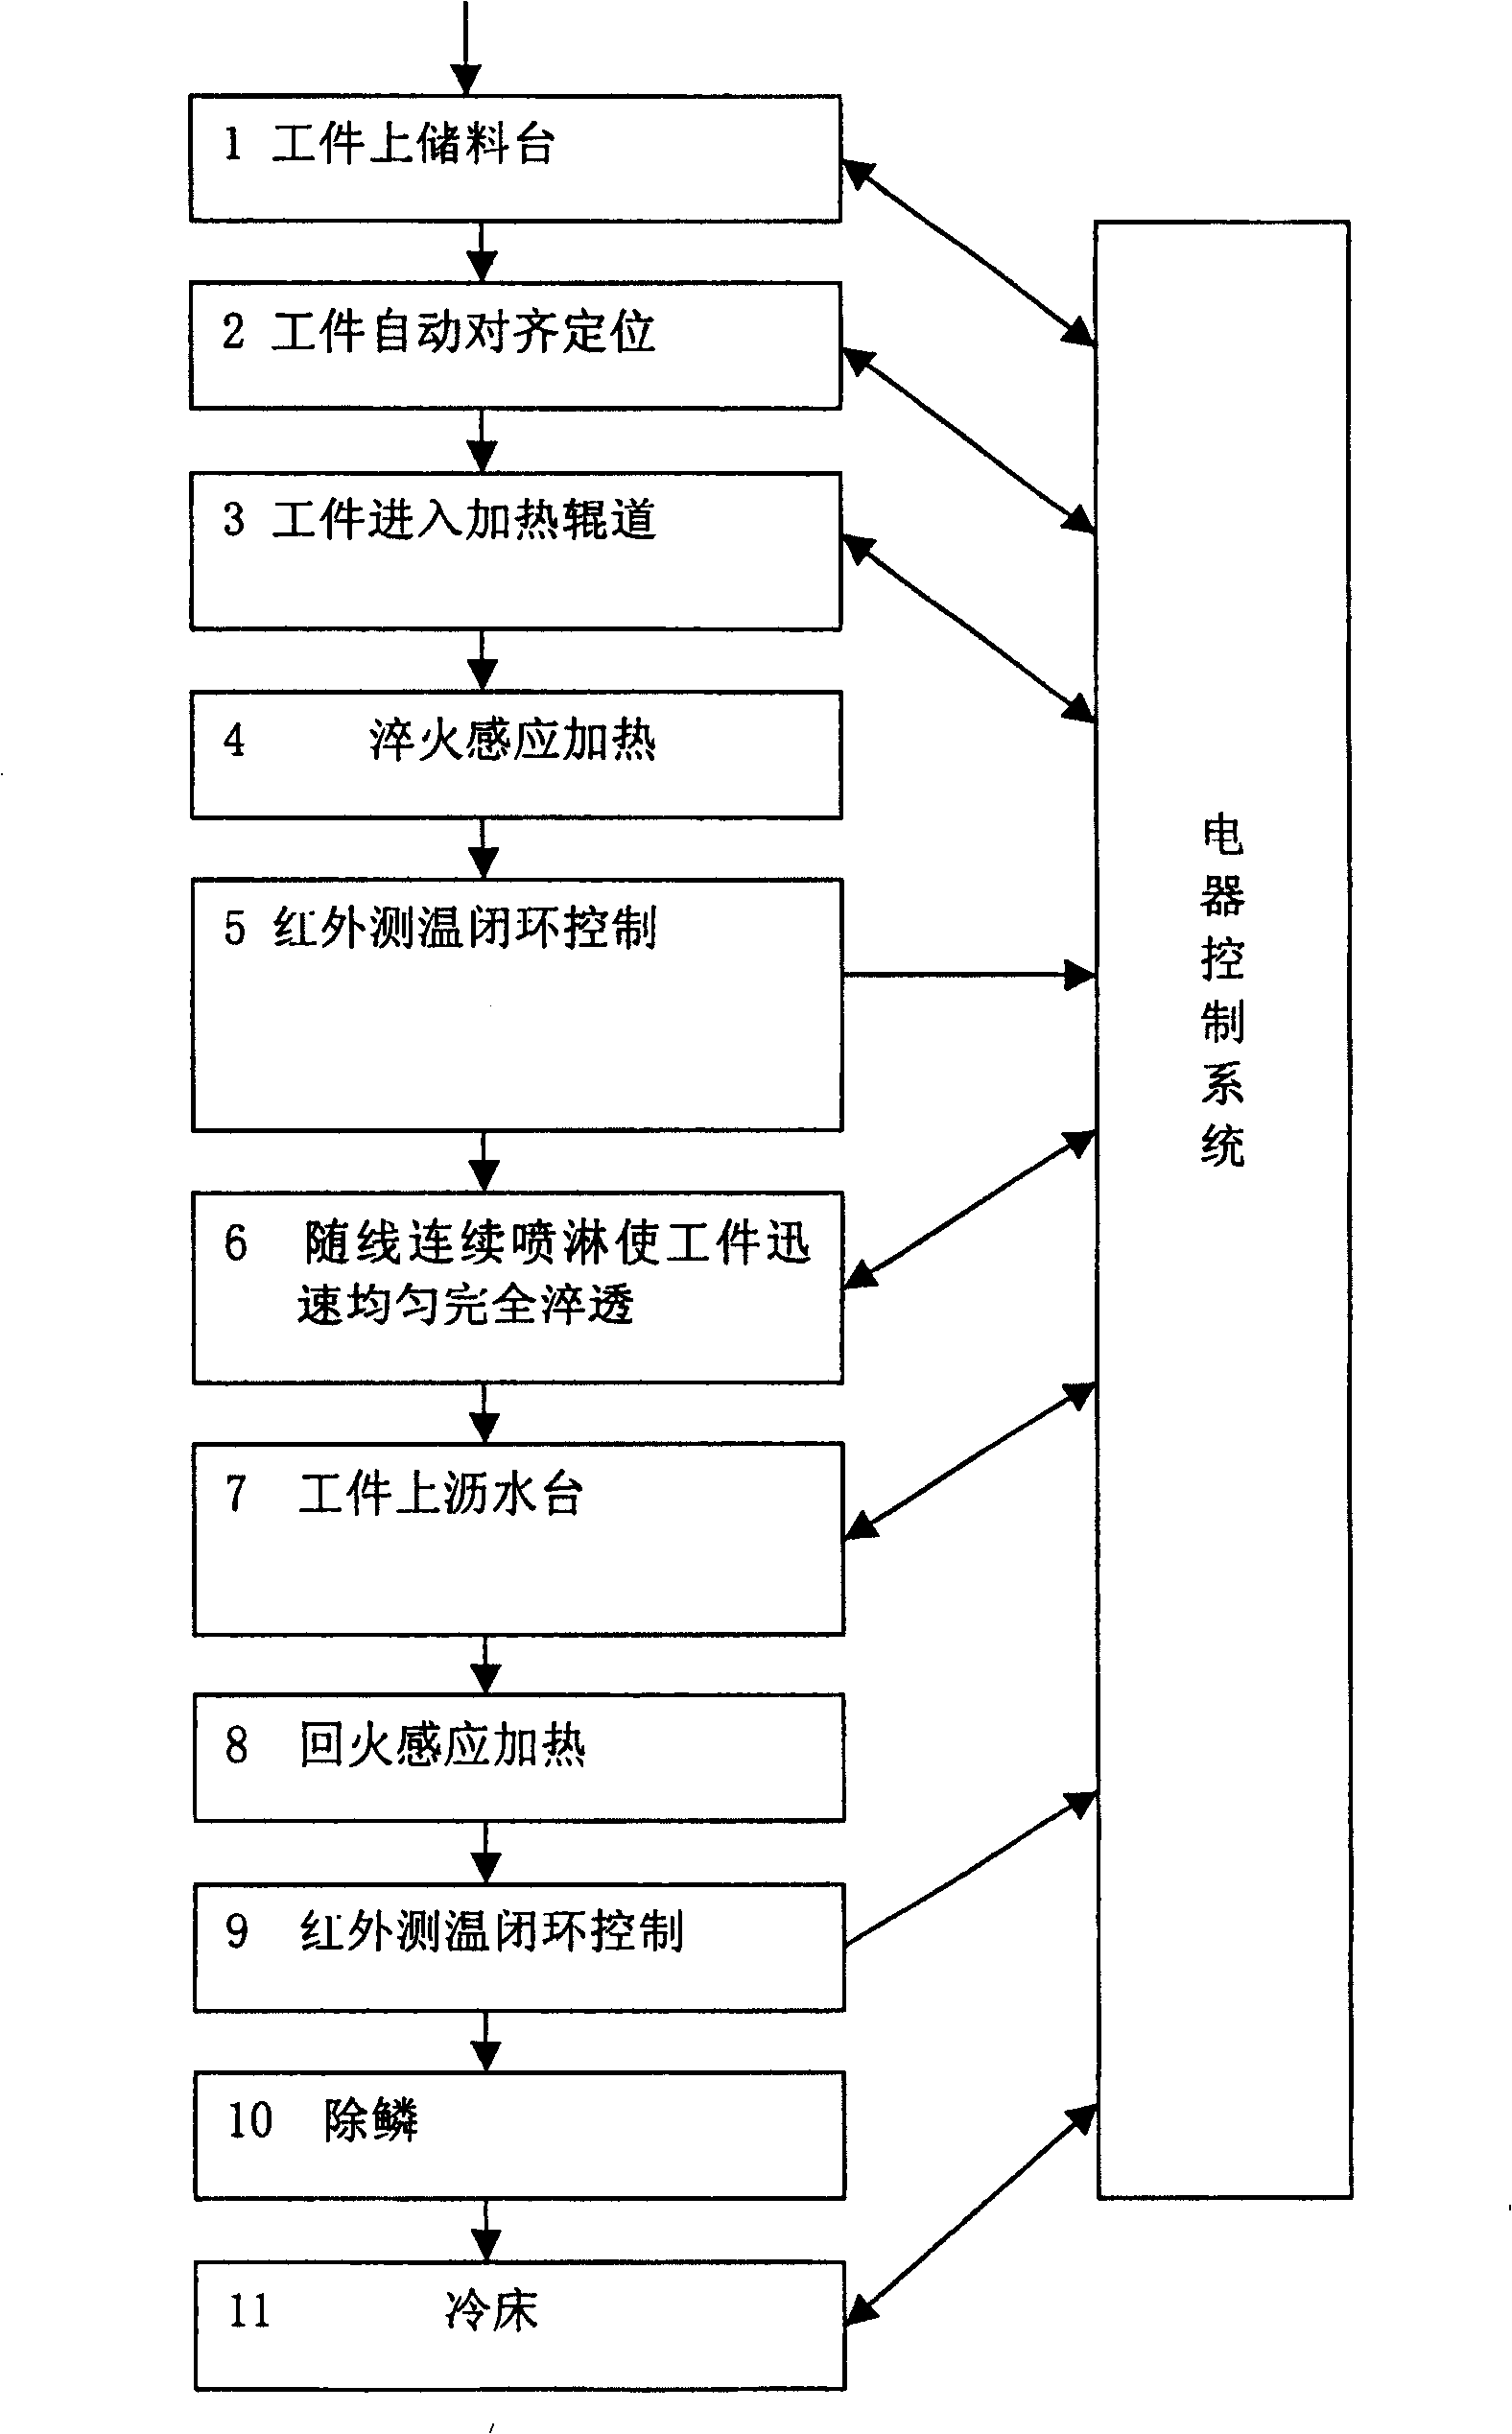 Medium frequency induction heating treatment method for steel pipe, petroleum well pipe and drill pipe